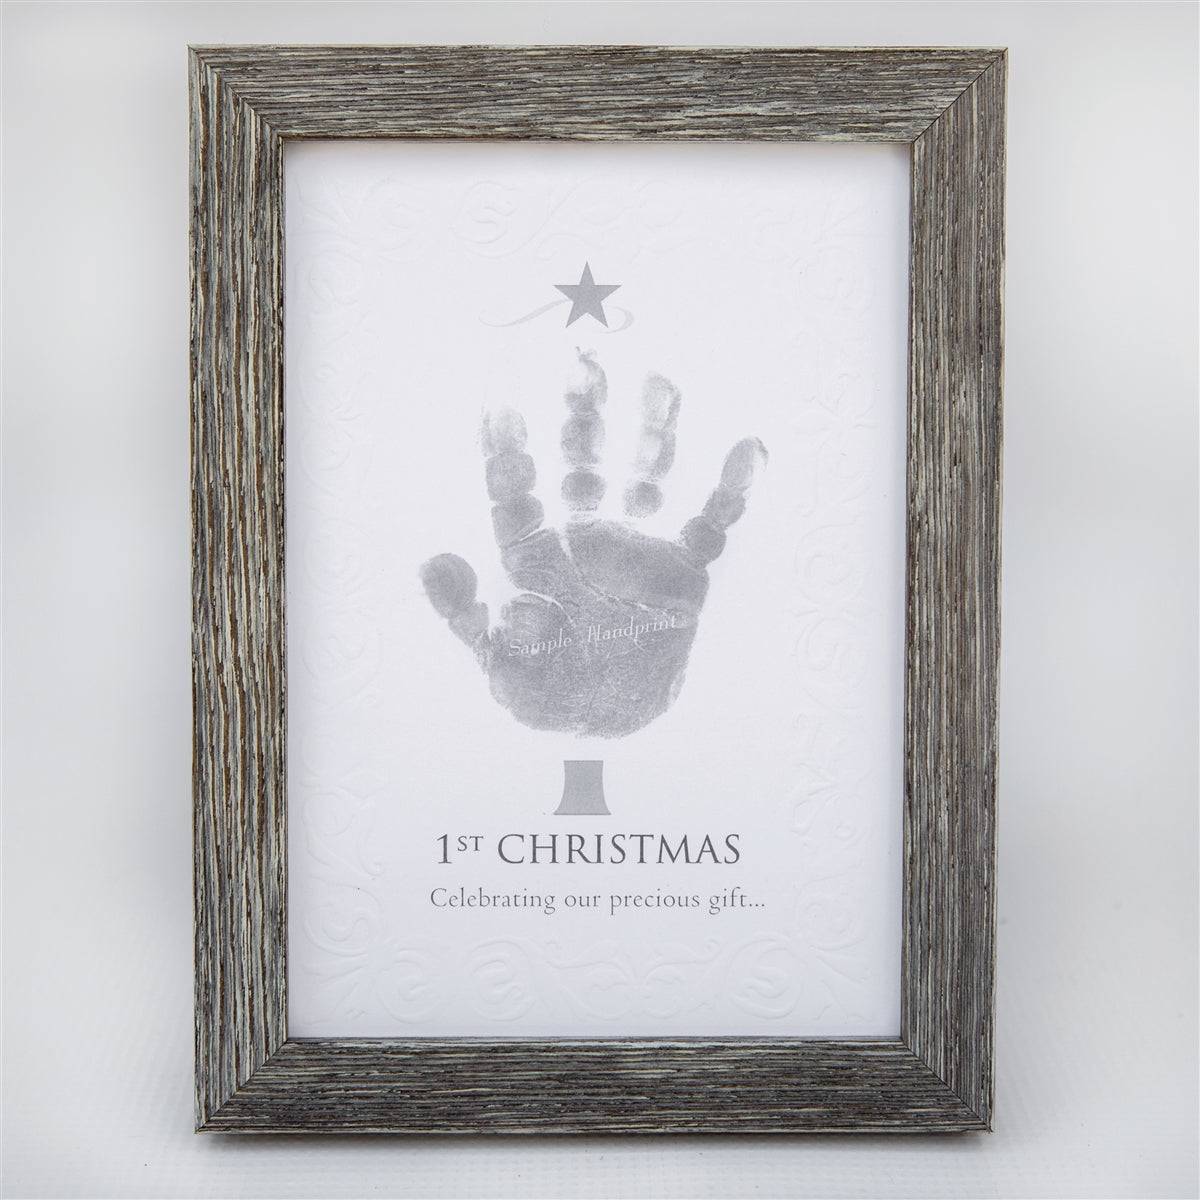 5x7 farmhouse frame with "1st Christmas" sentiment on embossed cardstock with space for a child's handprint.